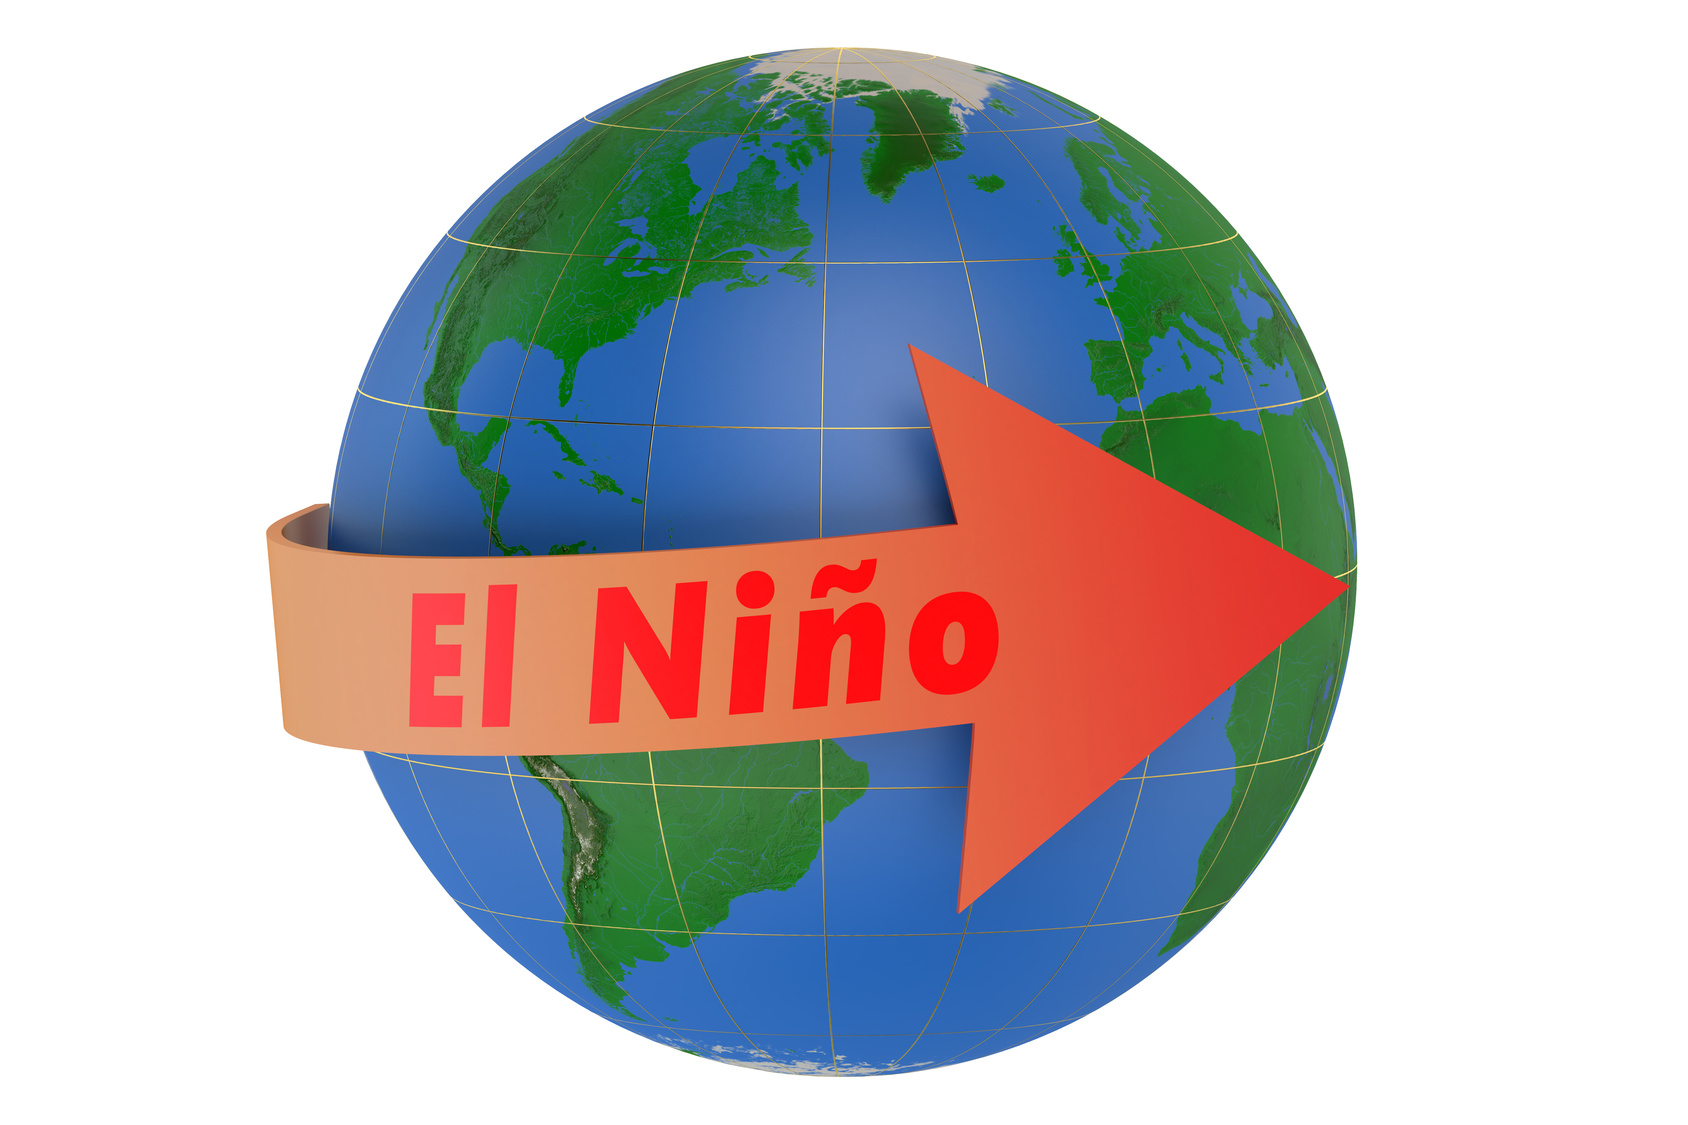 You Need Los Angeles Flood Insurance to be Ready for the Predicted California El Niño!